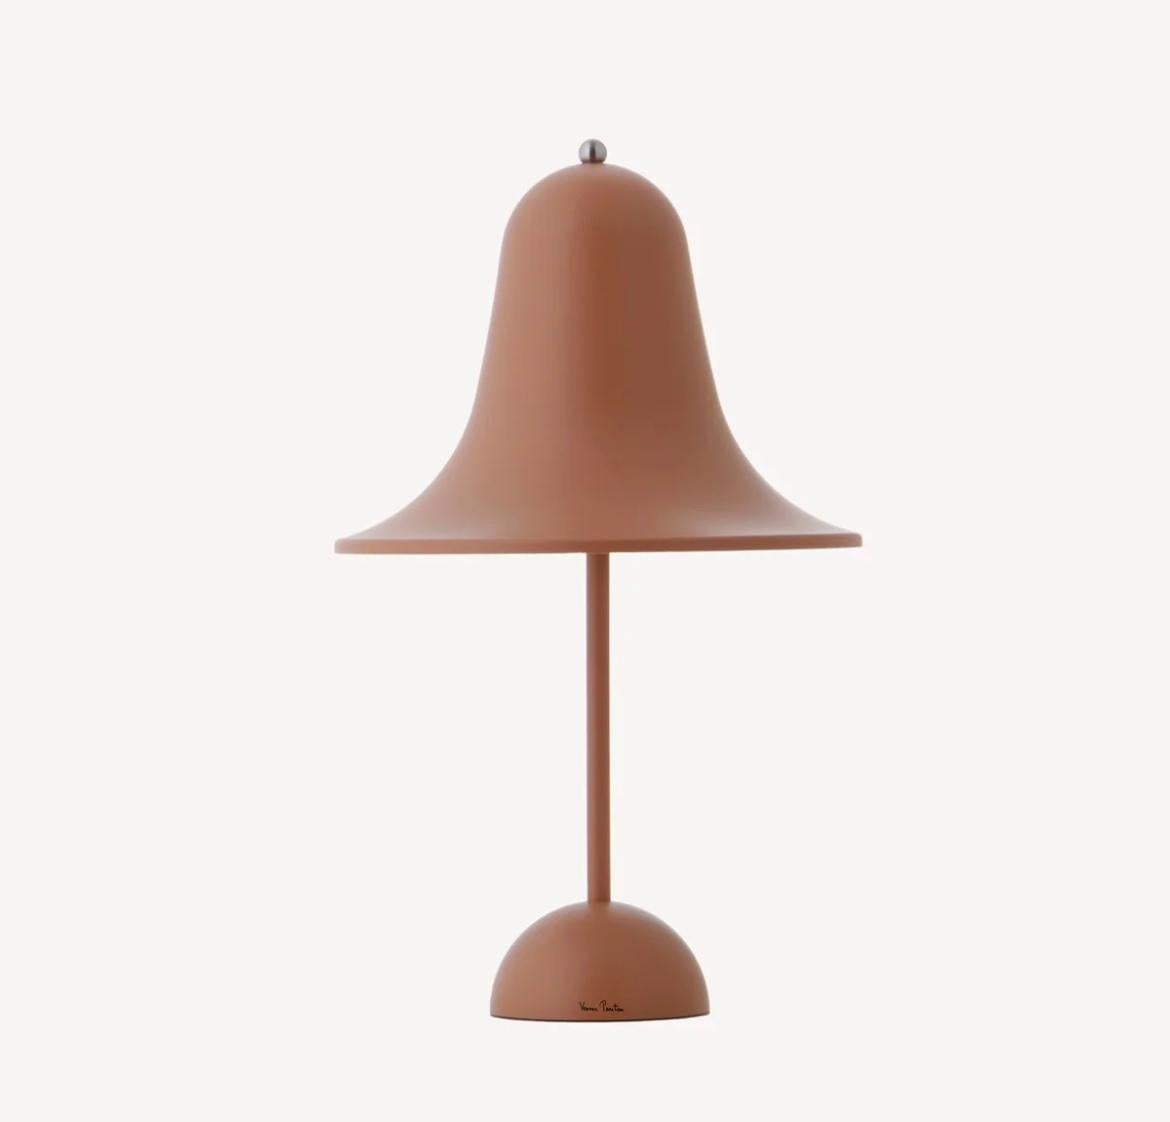 Verner Panton 'Pantop Portable' table lamp in 'Terracotta' for Verpan. Designed in 1980. New, current production.

This is a versatile smaller and wireless version of the 'Pantop' table lamp, usb-chargeable. 

The elegant Pantop line was